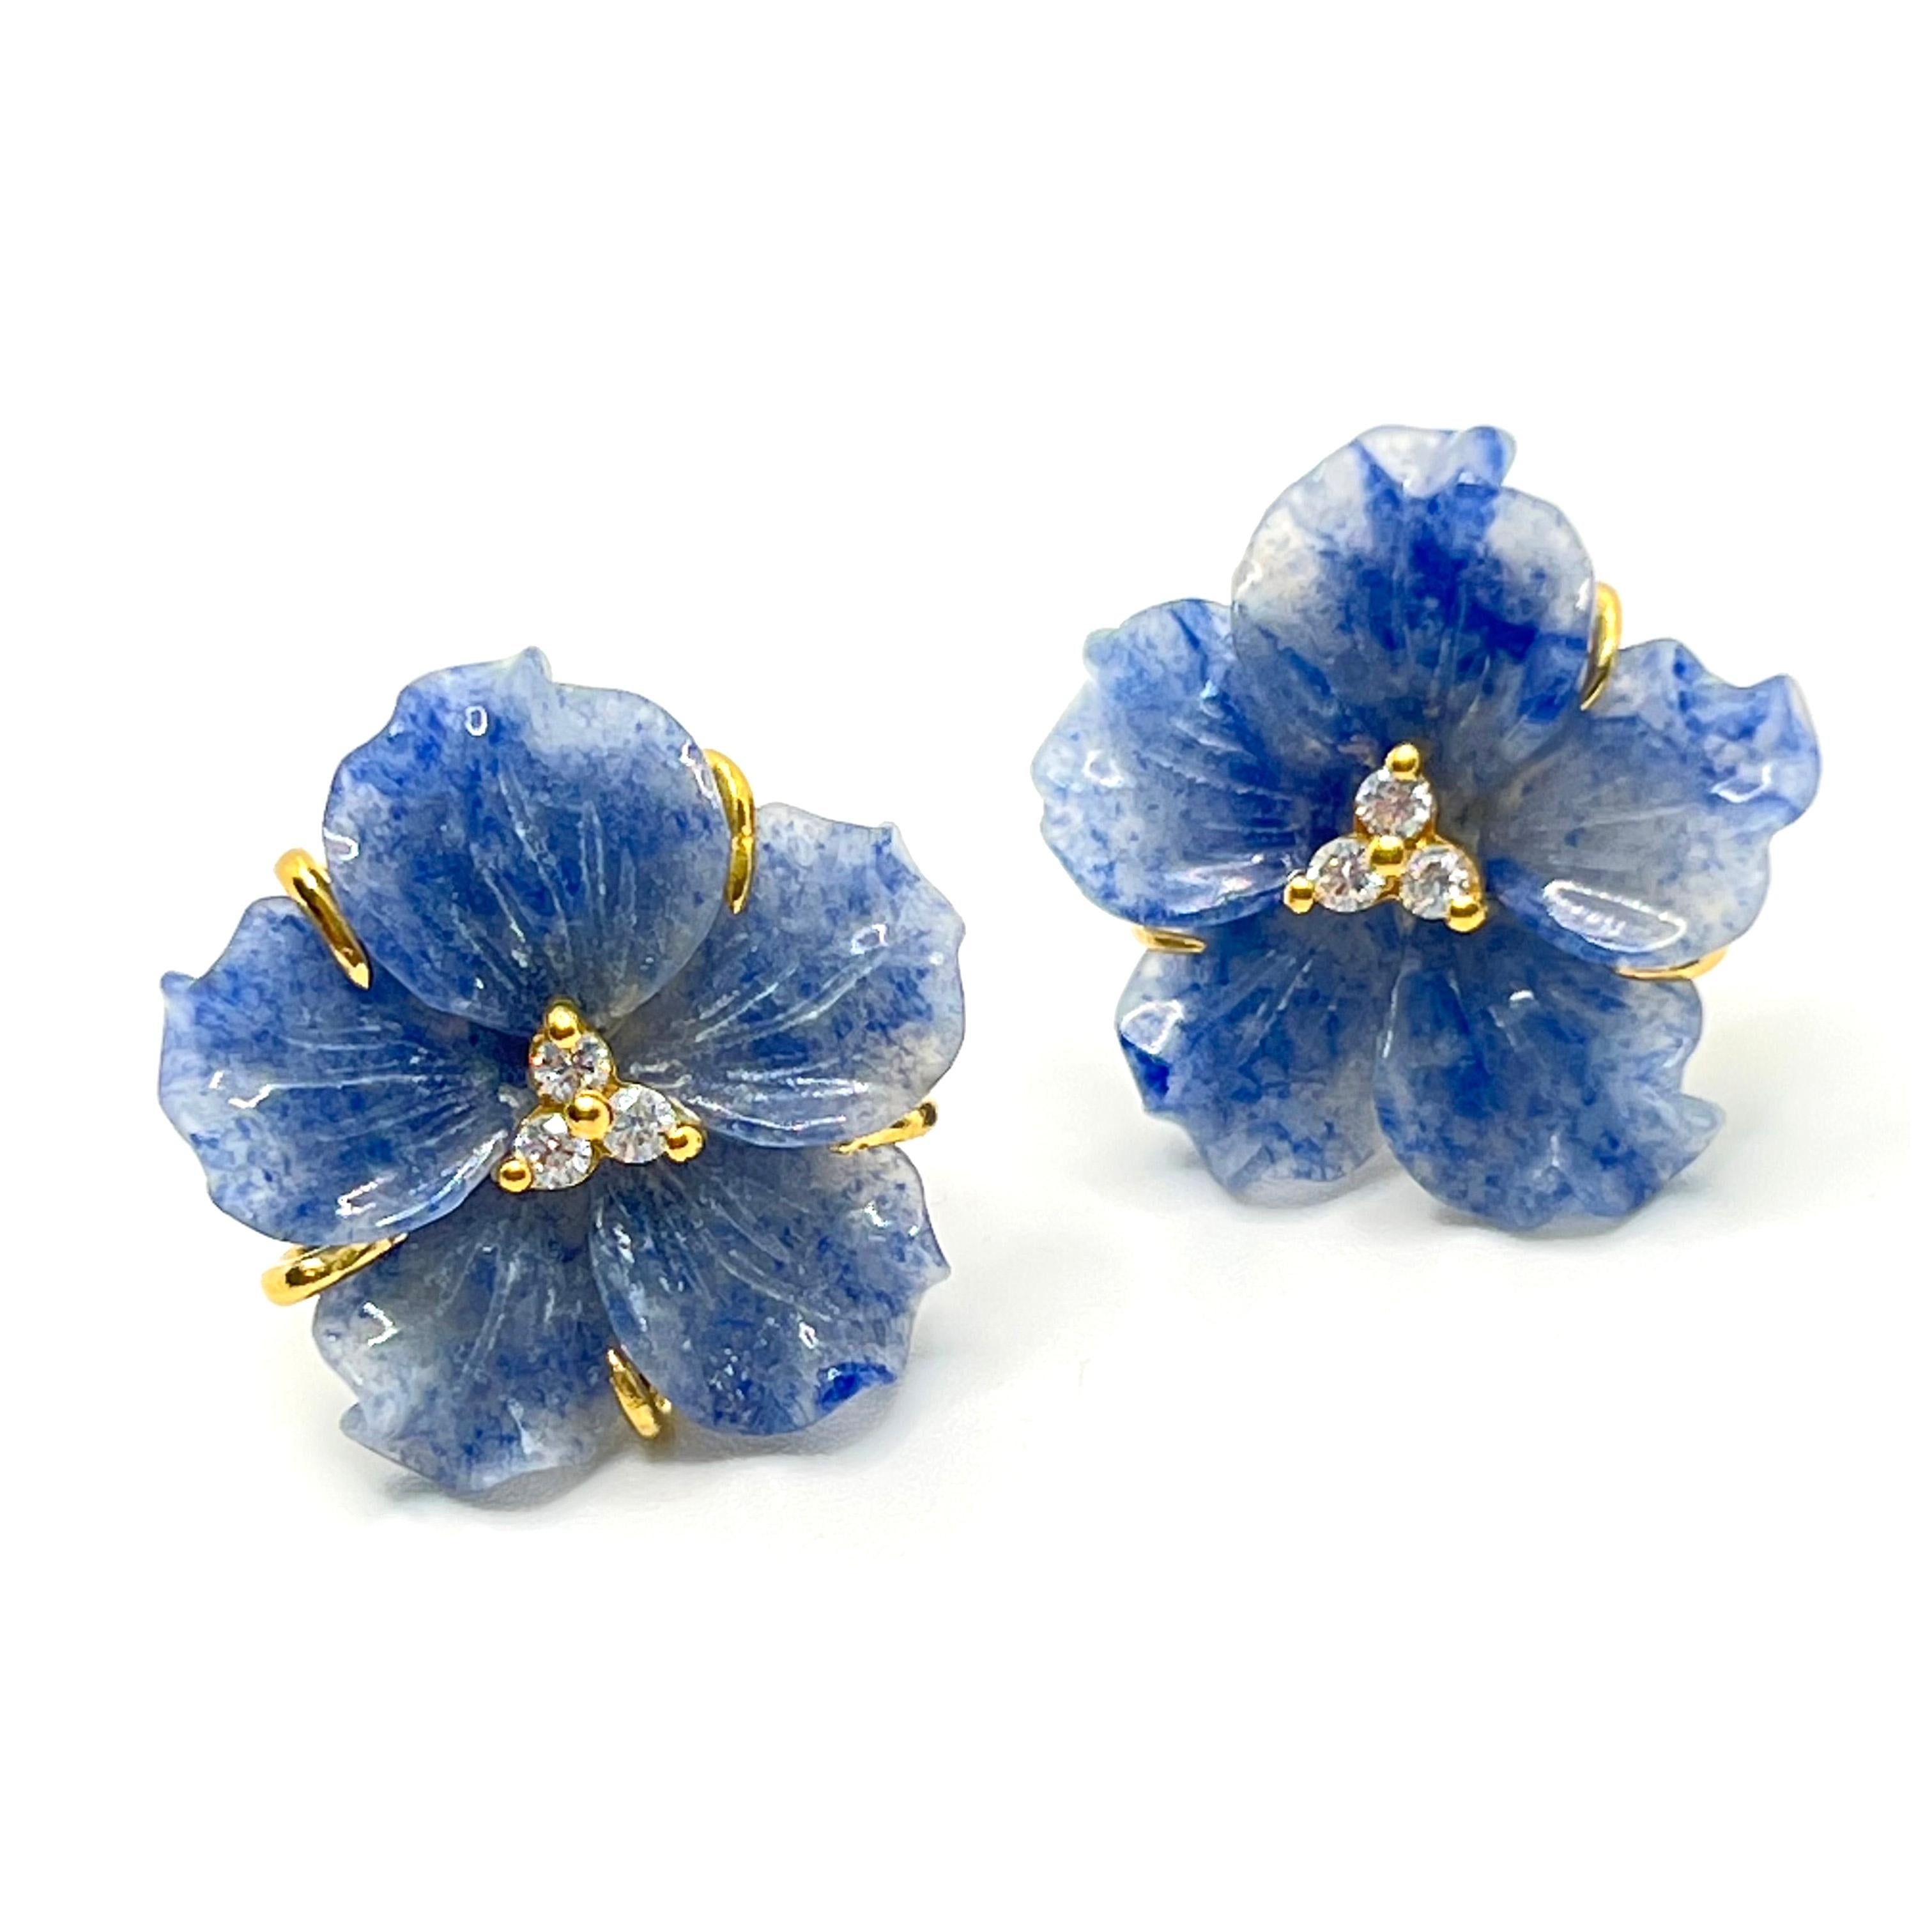 Elegant 23mm Carved Dumortierite Flower Vermeil Earrings

This gorgeous pair of earrings features 23mm dumortierite carved into beautiful 3D flower, adorned with round simulated diamonds in the center, handset in 18k yellow gold vermeil over